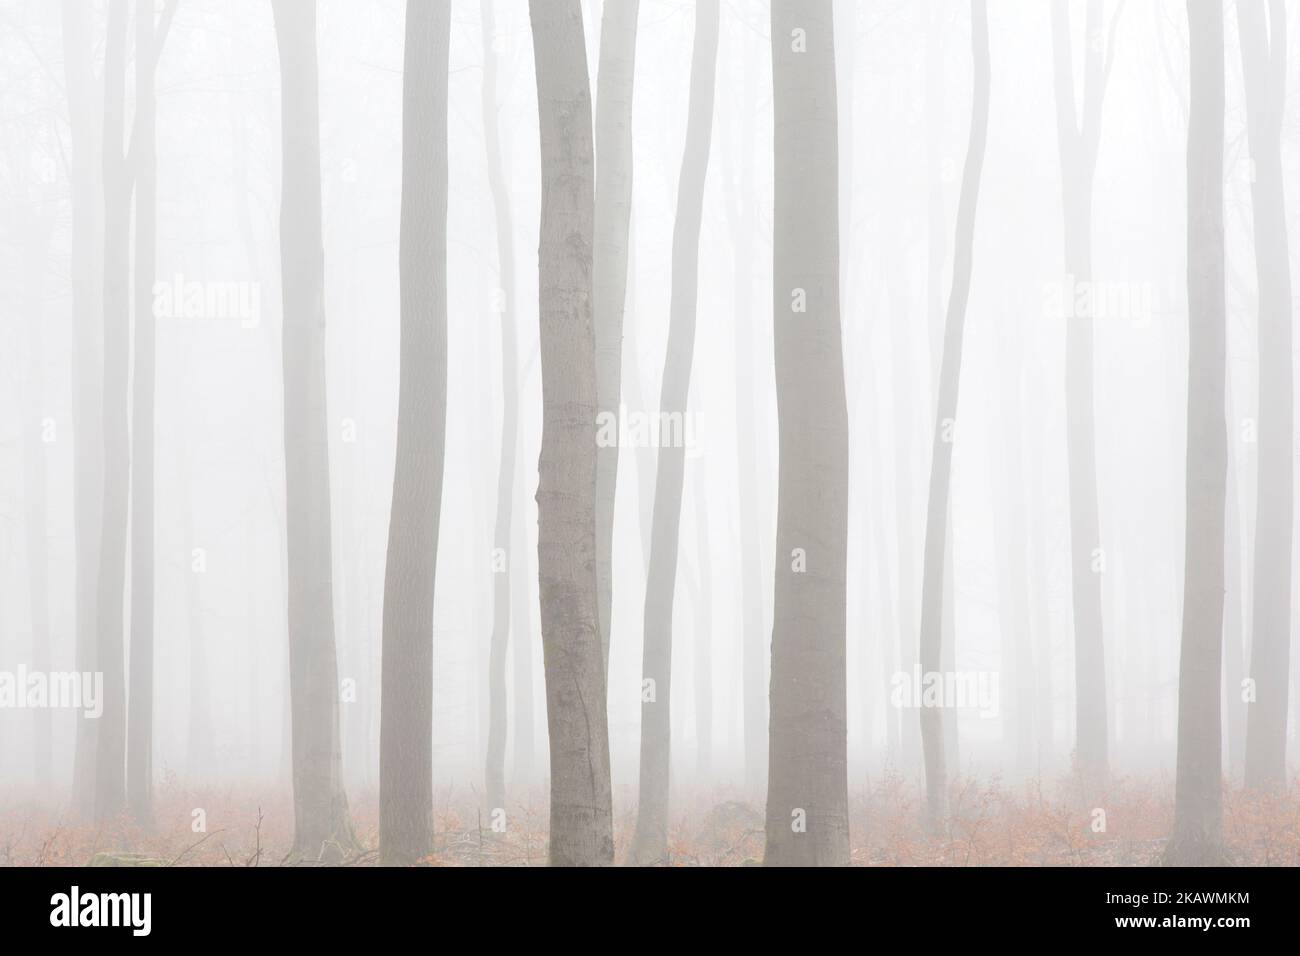 European beech trees / common beeches (Fagus sylvatica), tree trunks in forest covered in early morning mist in winter Stock Photo